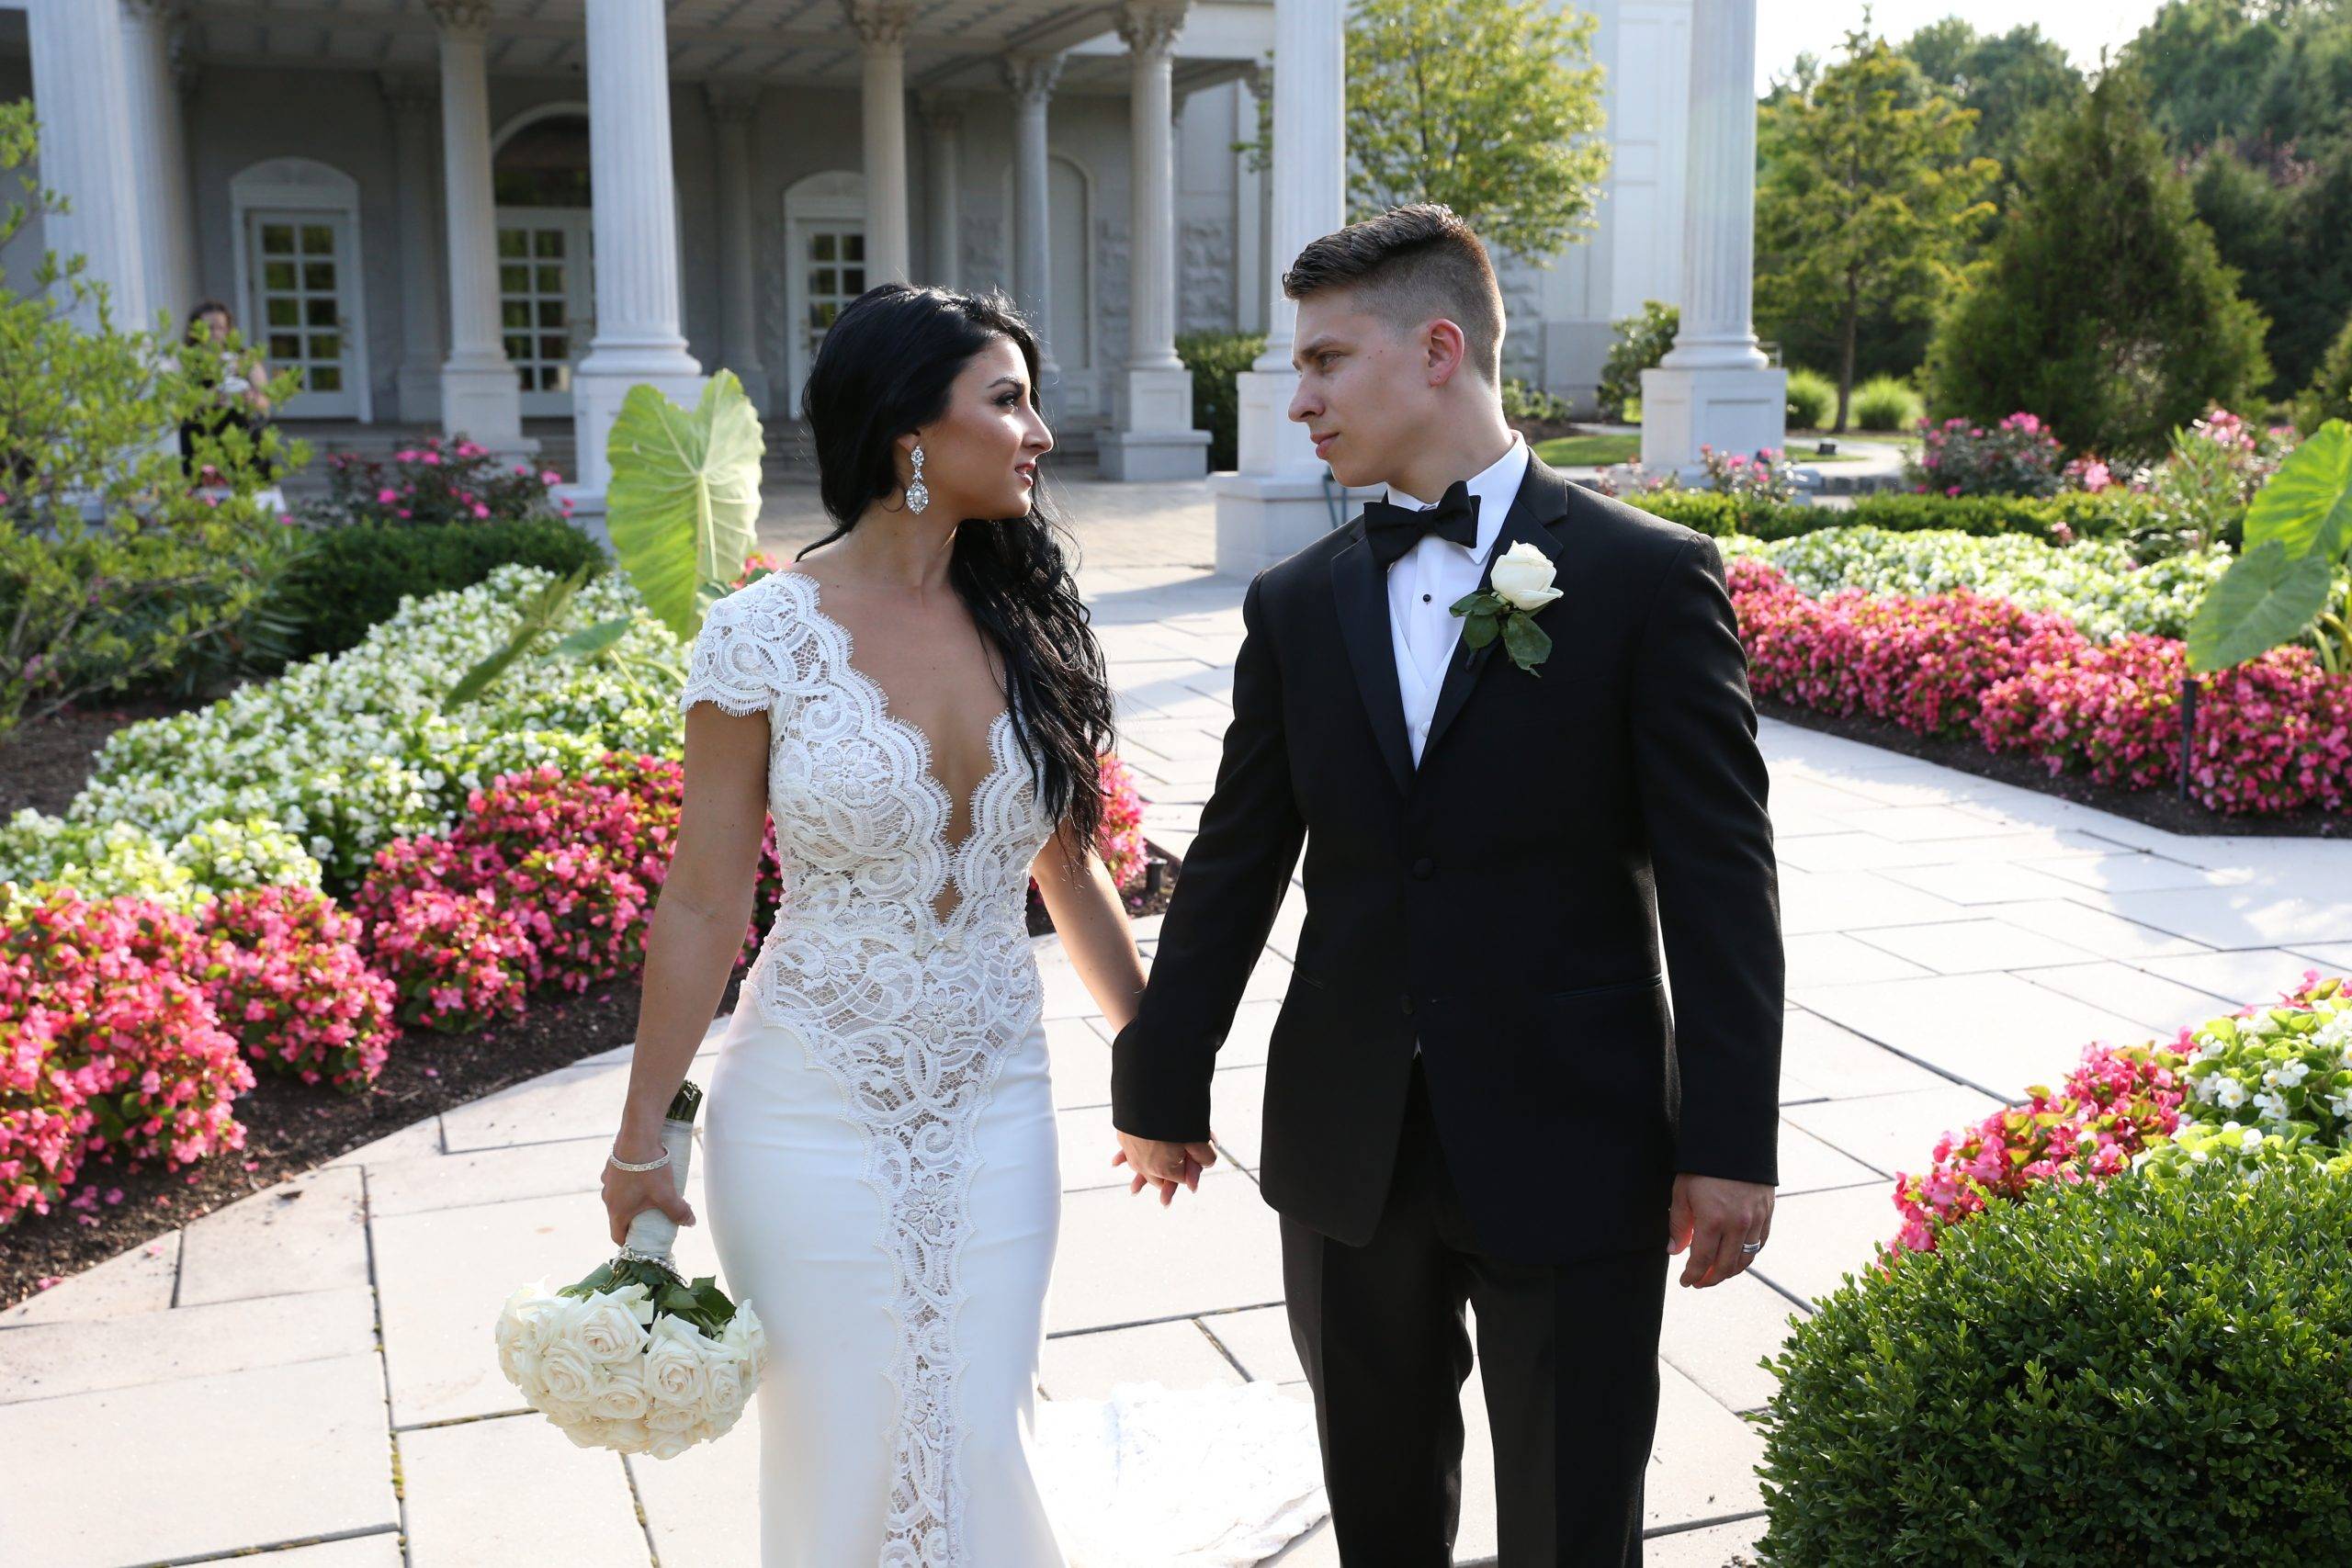 A bride and groom standing in front of a mansion.